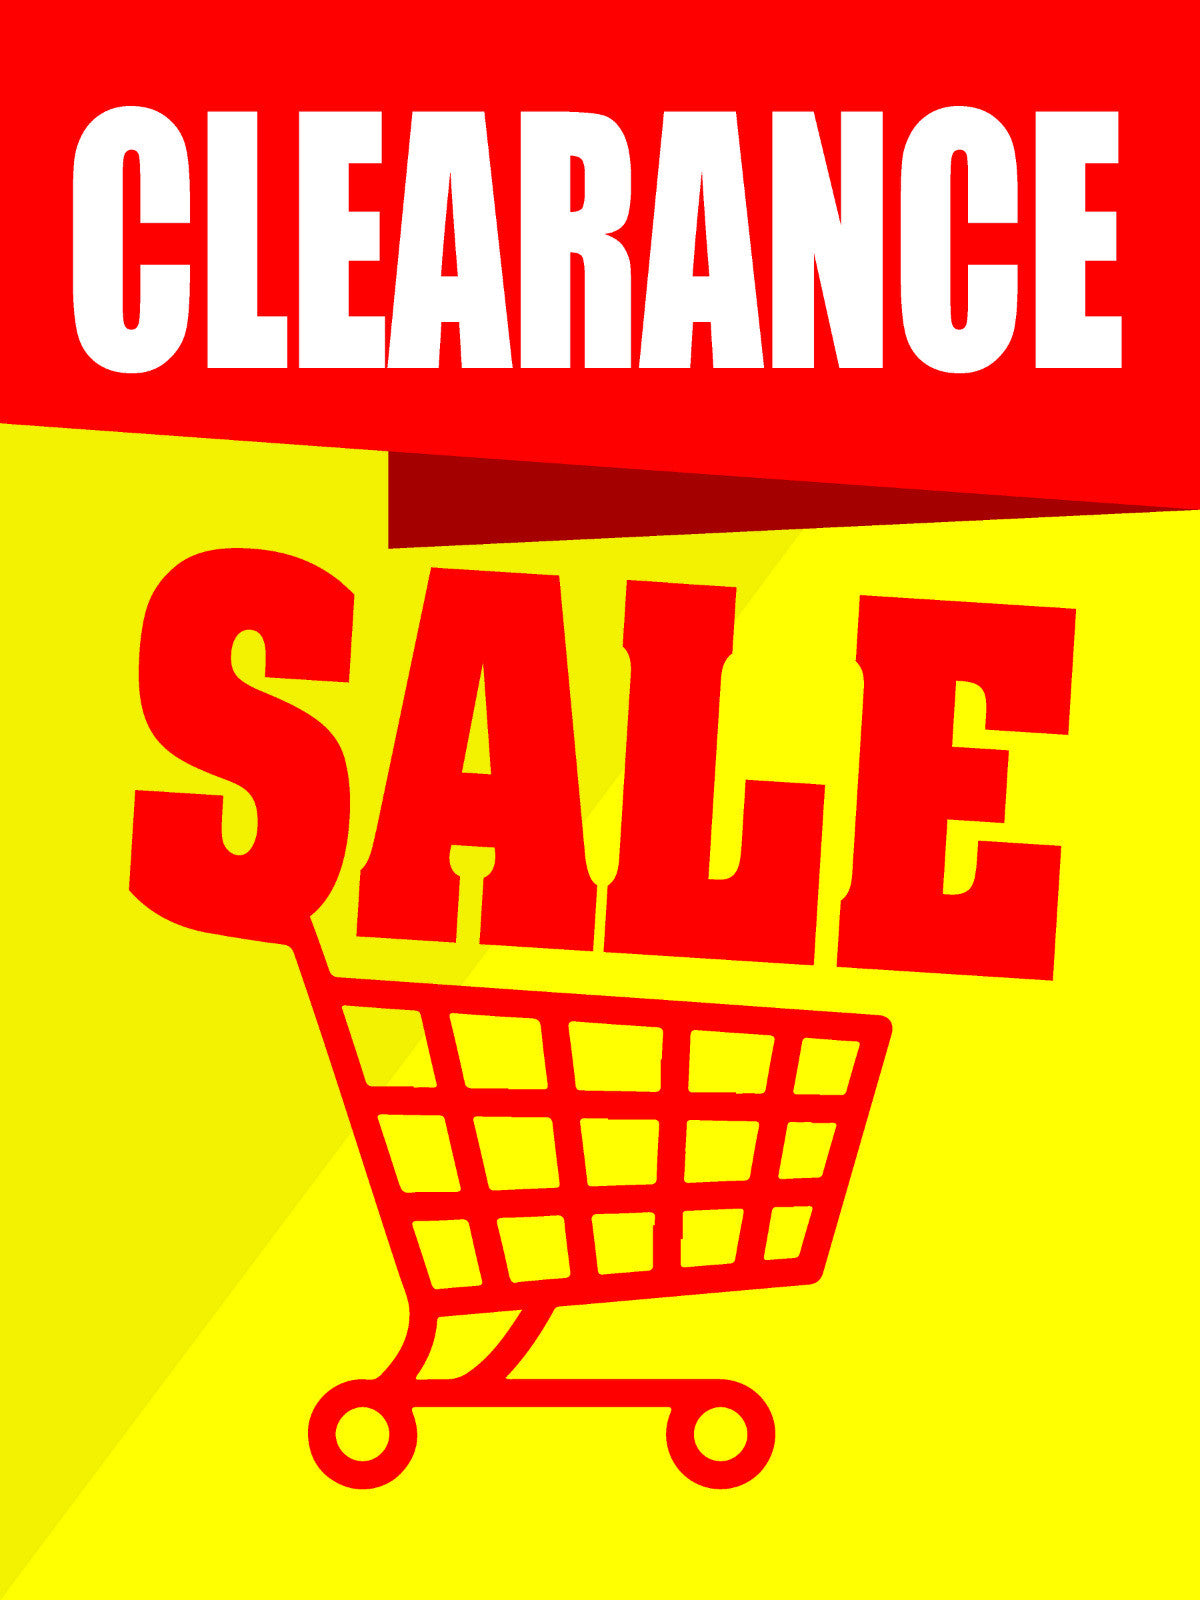 clearance-sale-business-retail-display-sign-18-w-x-24-h-full-color